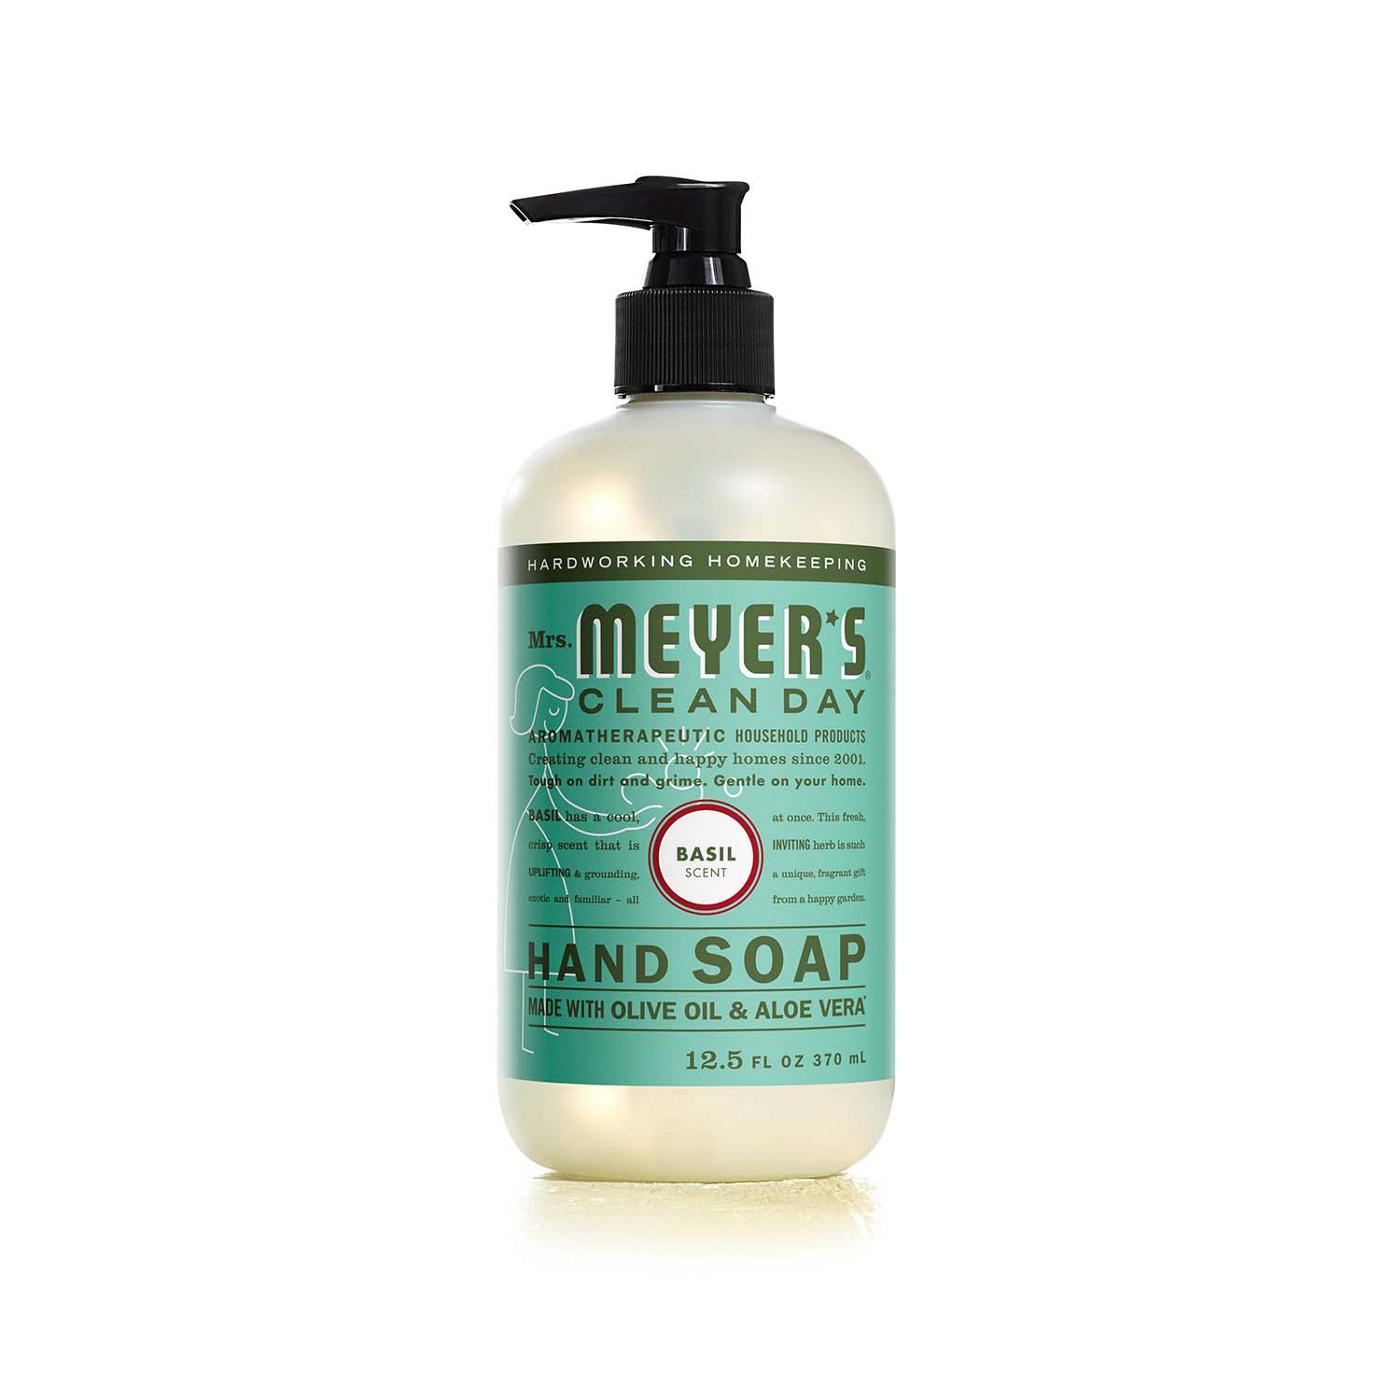 Mrs. Meyer's Clean Day Basil Scent Liquid Hand Soap; image 1 of 6